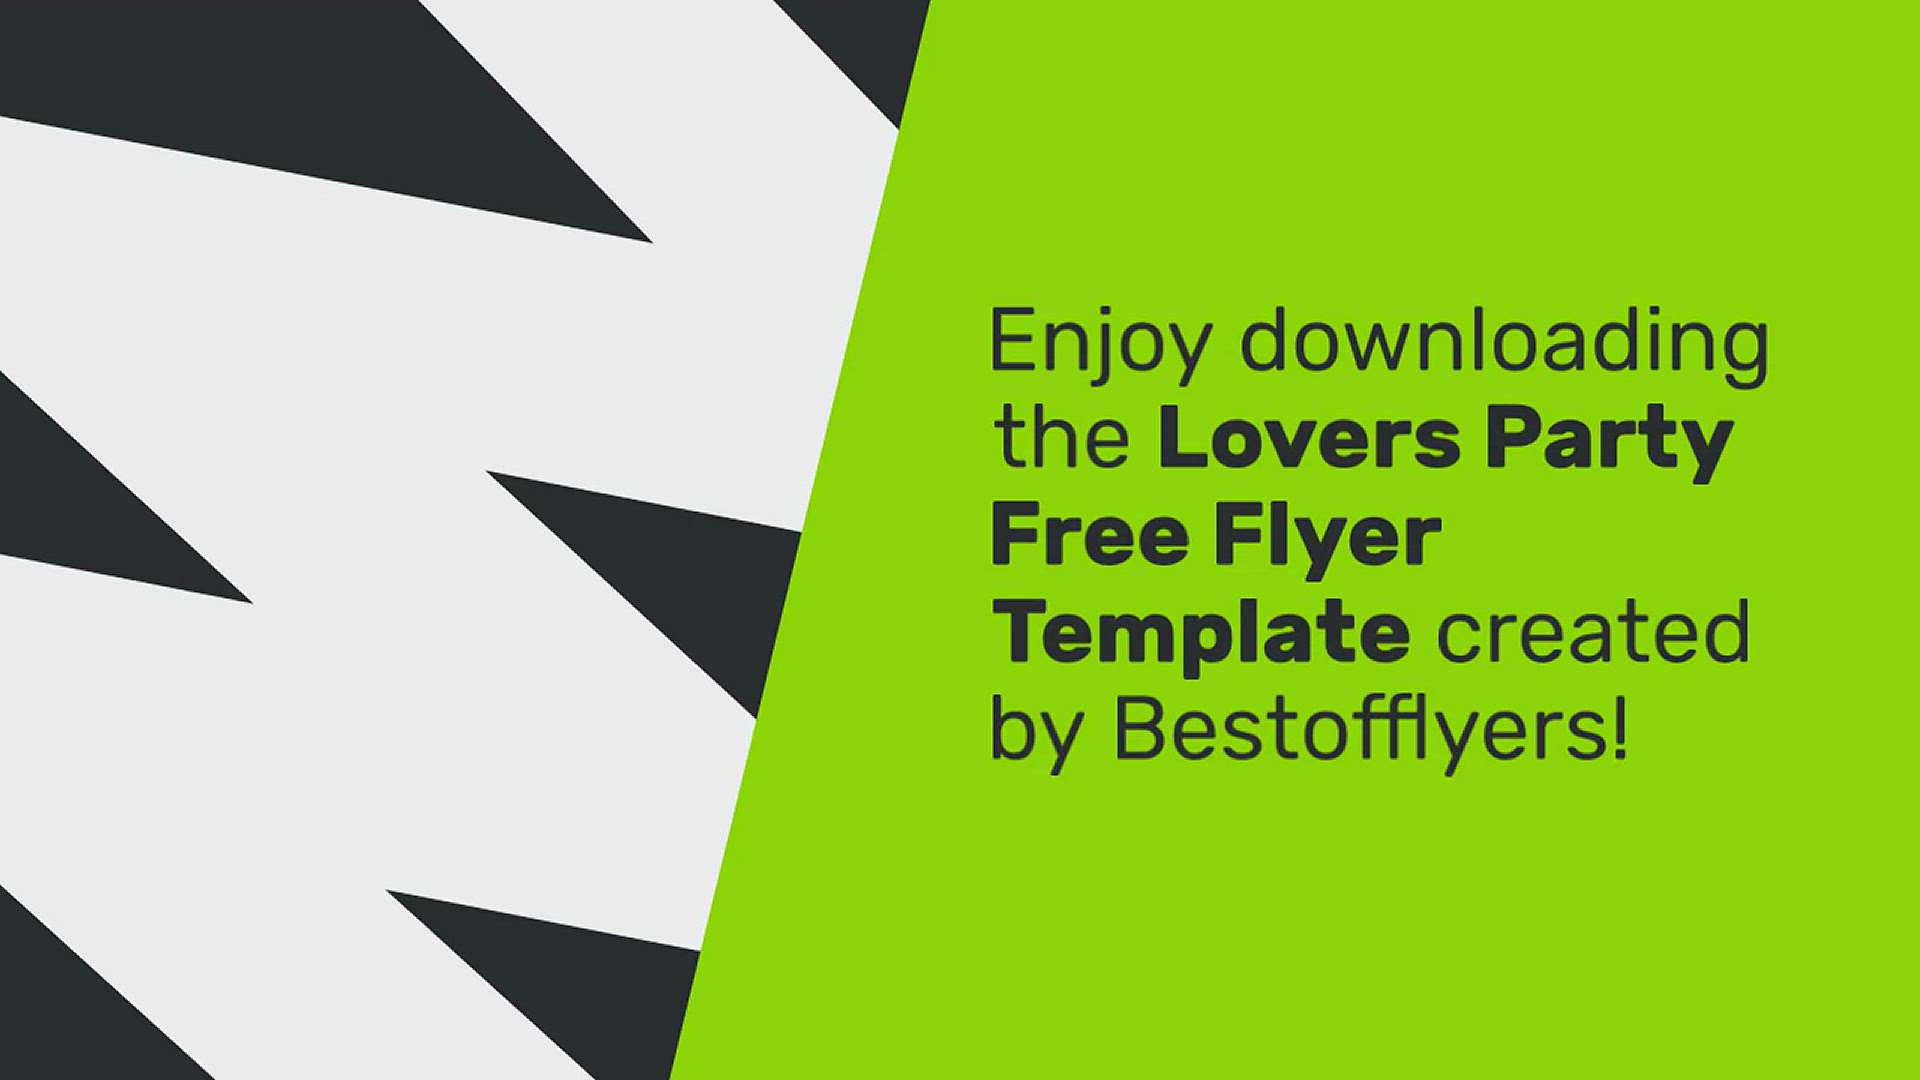 Best Deal PSD, 15,000+ High Quality Free PSD Templates for Download